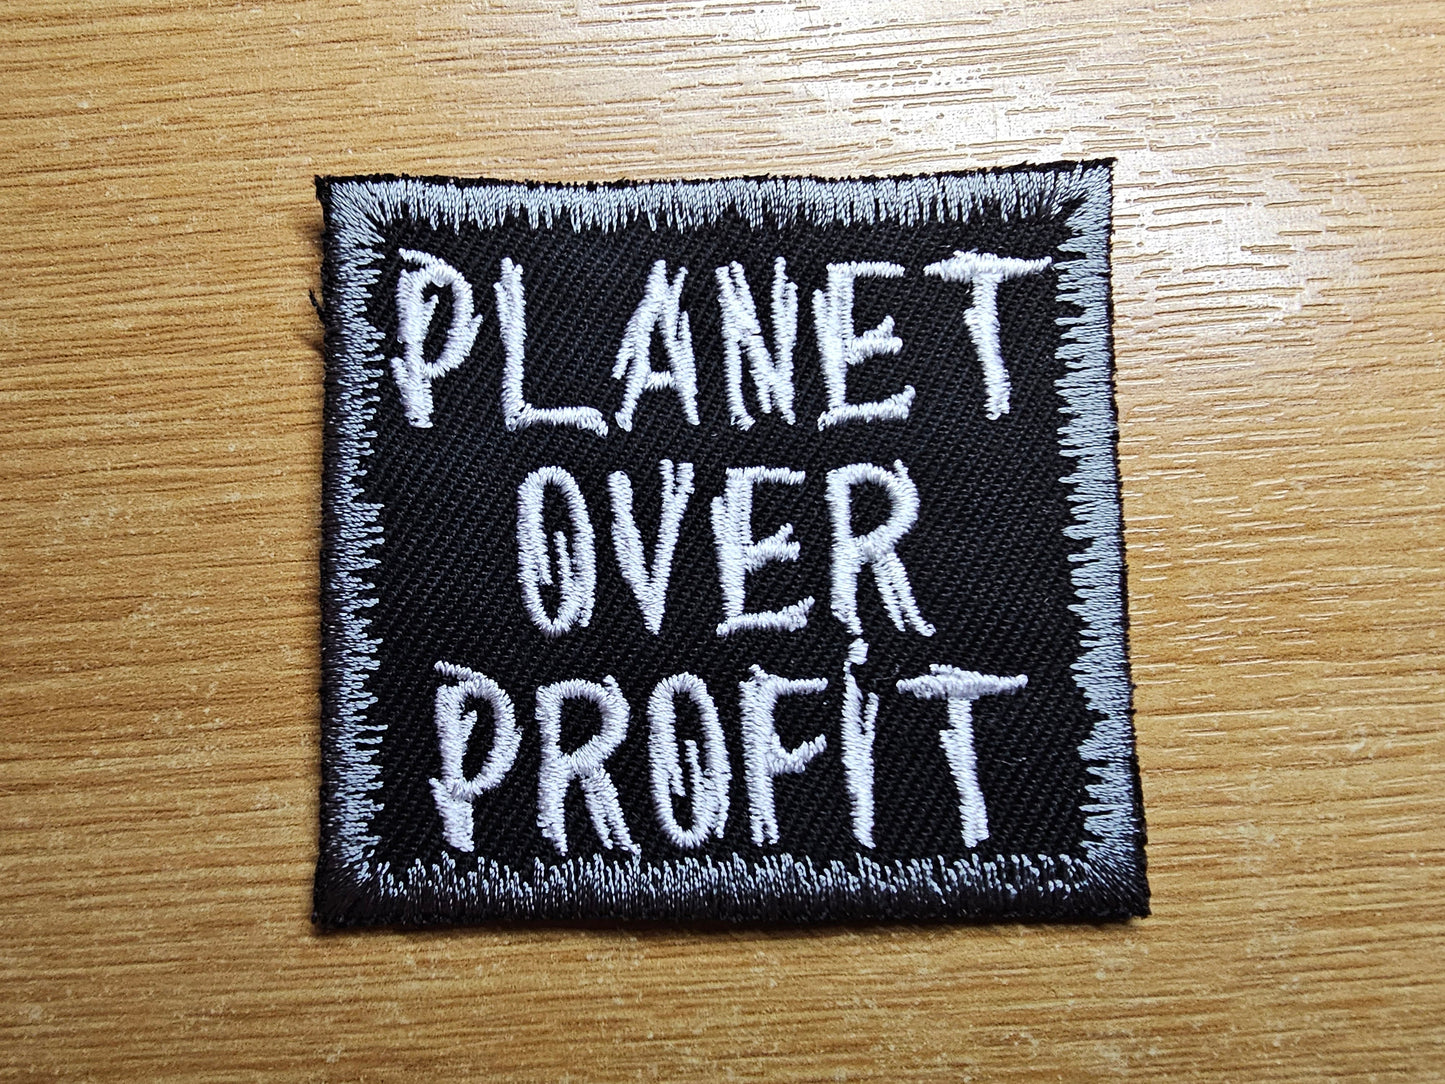 Planet Over Profit Embroidered Patch Grey Climate Crisis Environmental Action